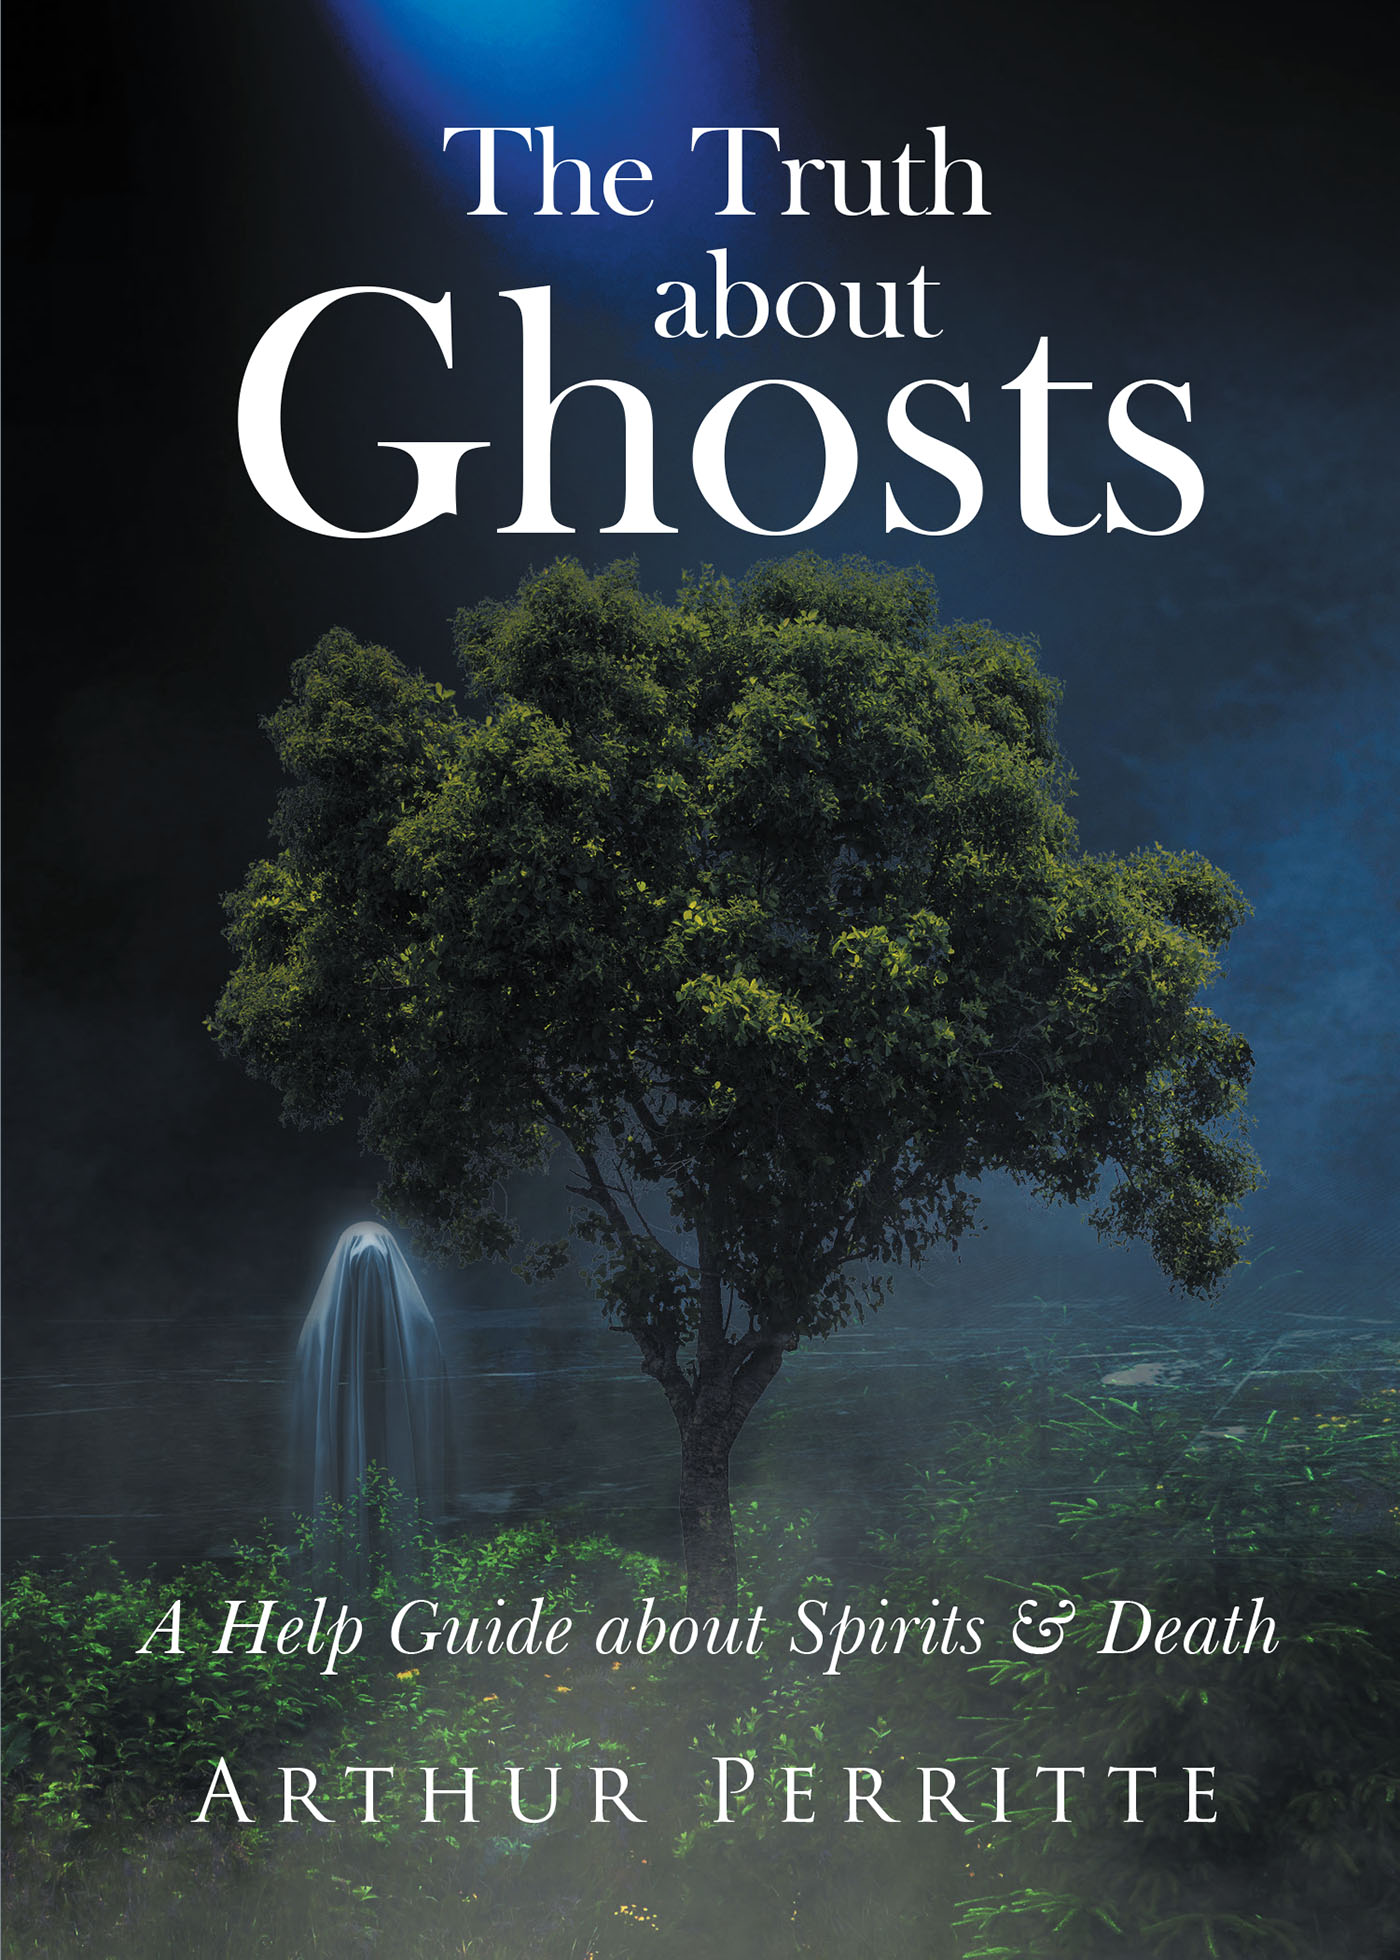 Arthur Perritte’s New Book, “The Truth about Ghosts: A Help Guide about Spirits,” is an Eye-Opening Read That Explains Supernatural Occurrences Through a Christian Lens